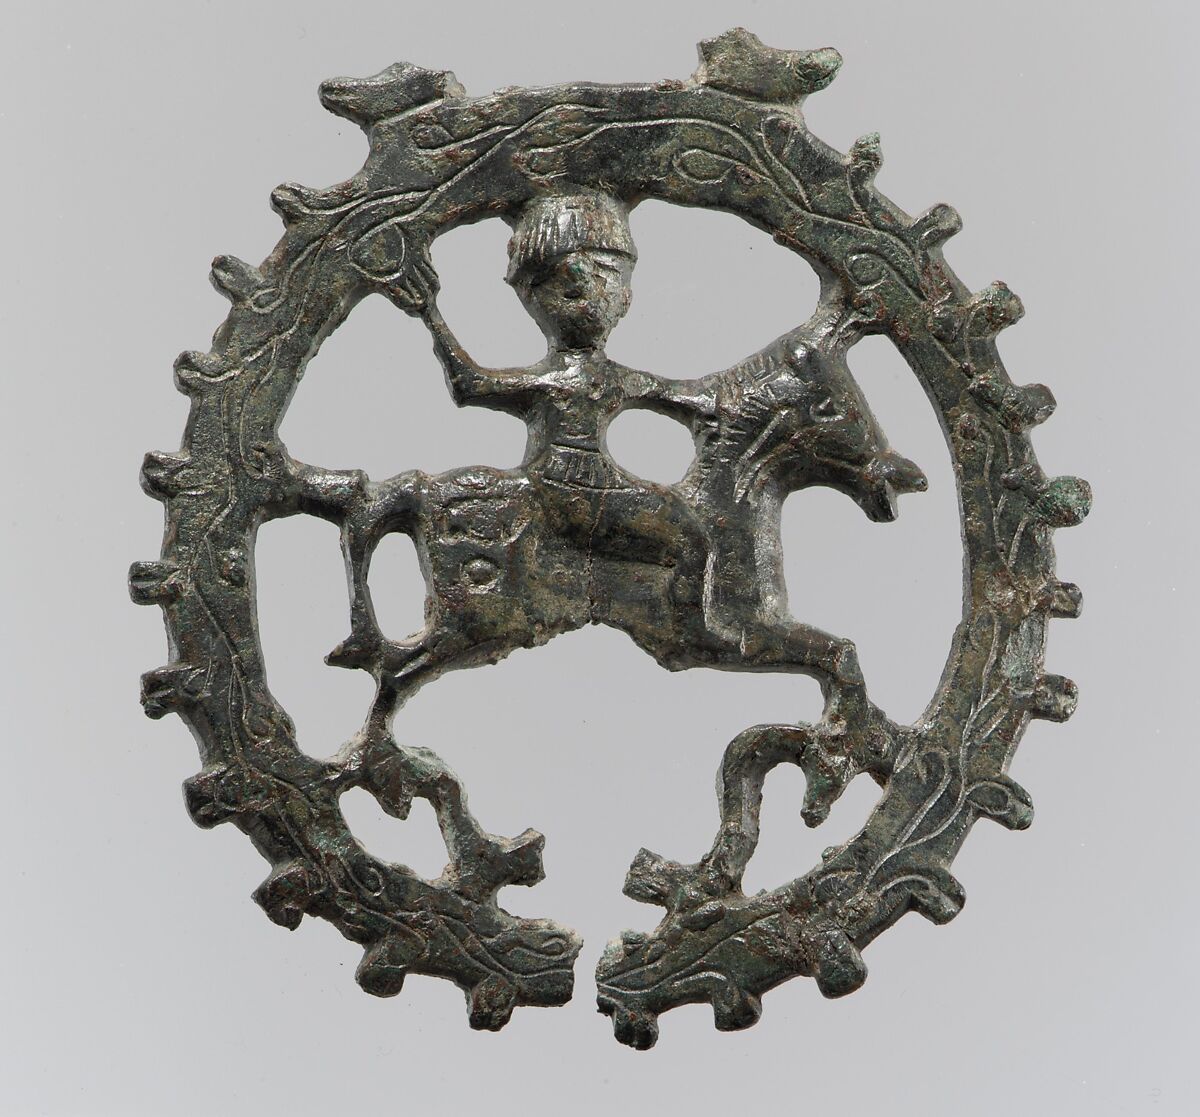 Harness Pendant, with Mounted Horseman, Copper alloy, Visigothic 